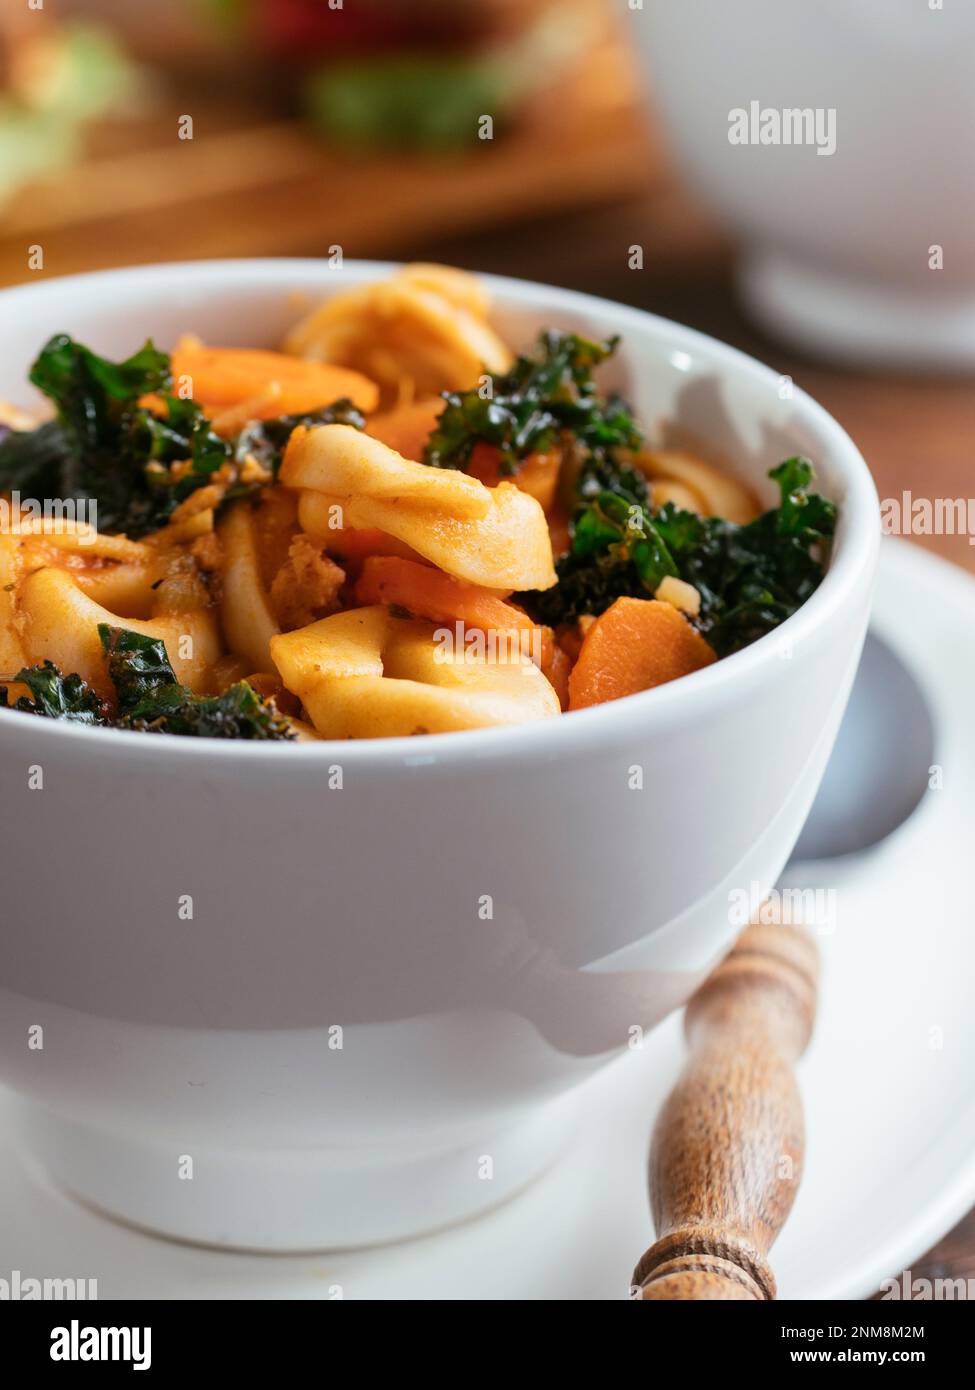 Vegan Tortellini Soup with TVP and Kale Stock Photo